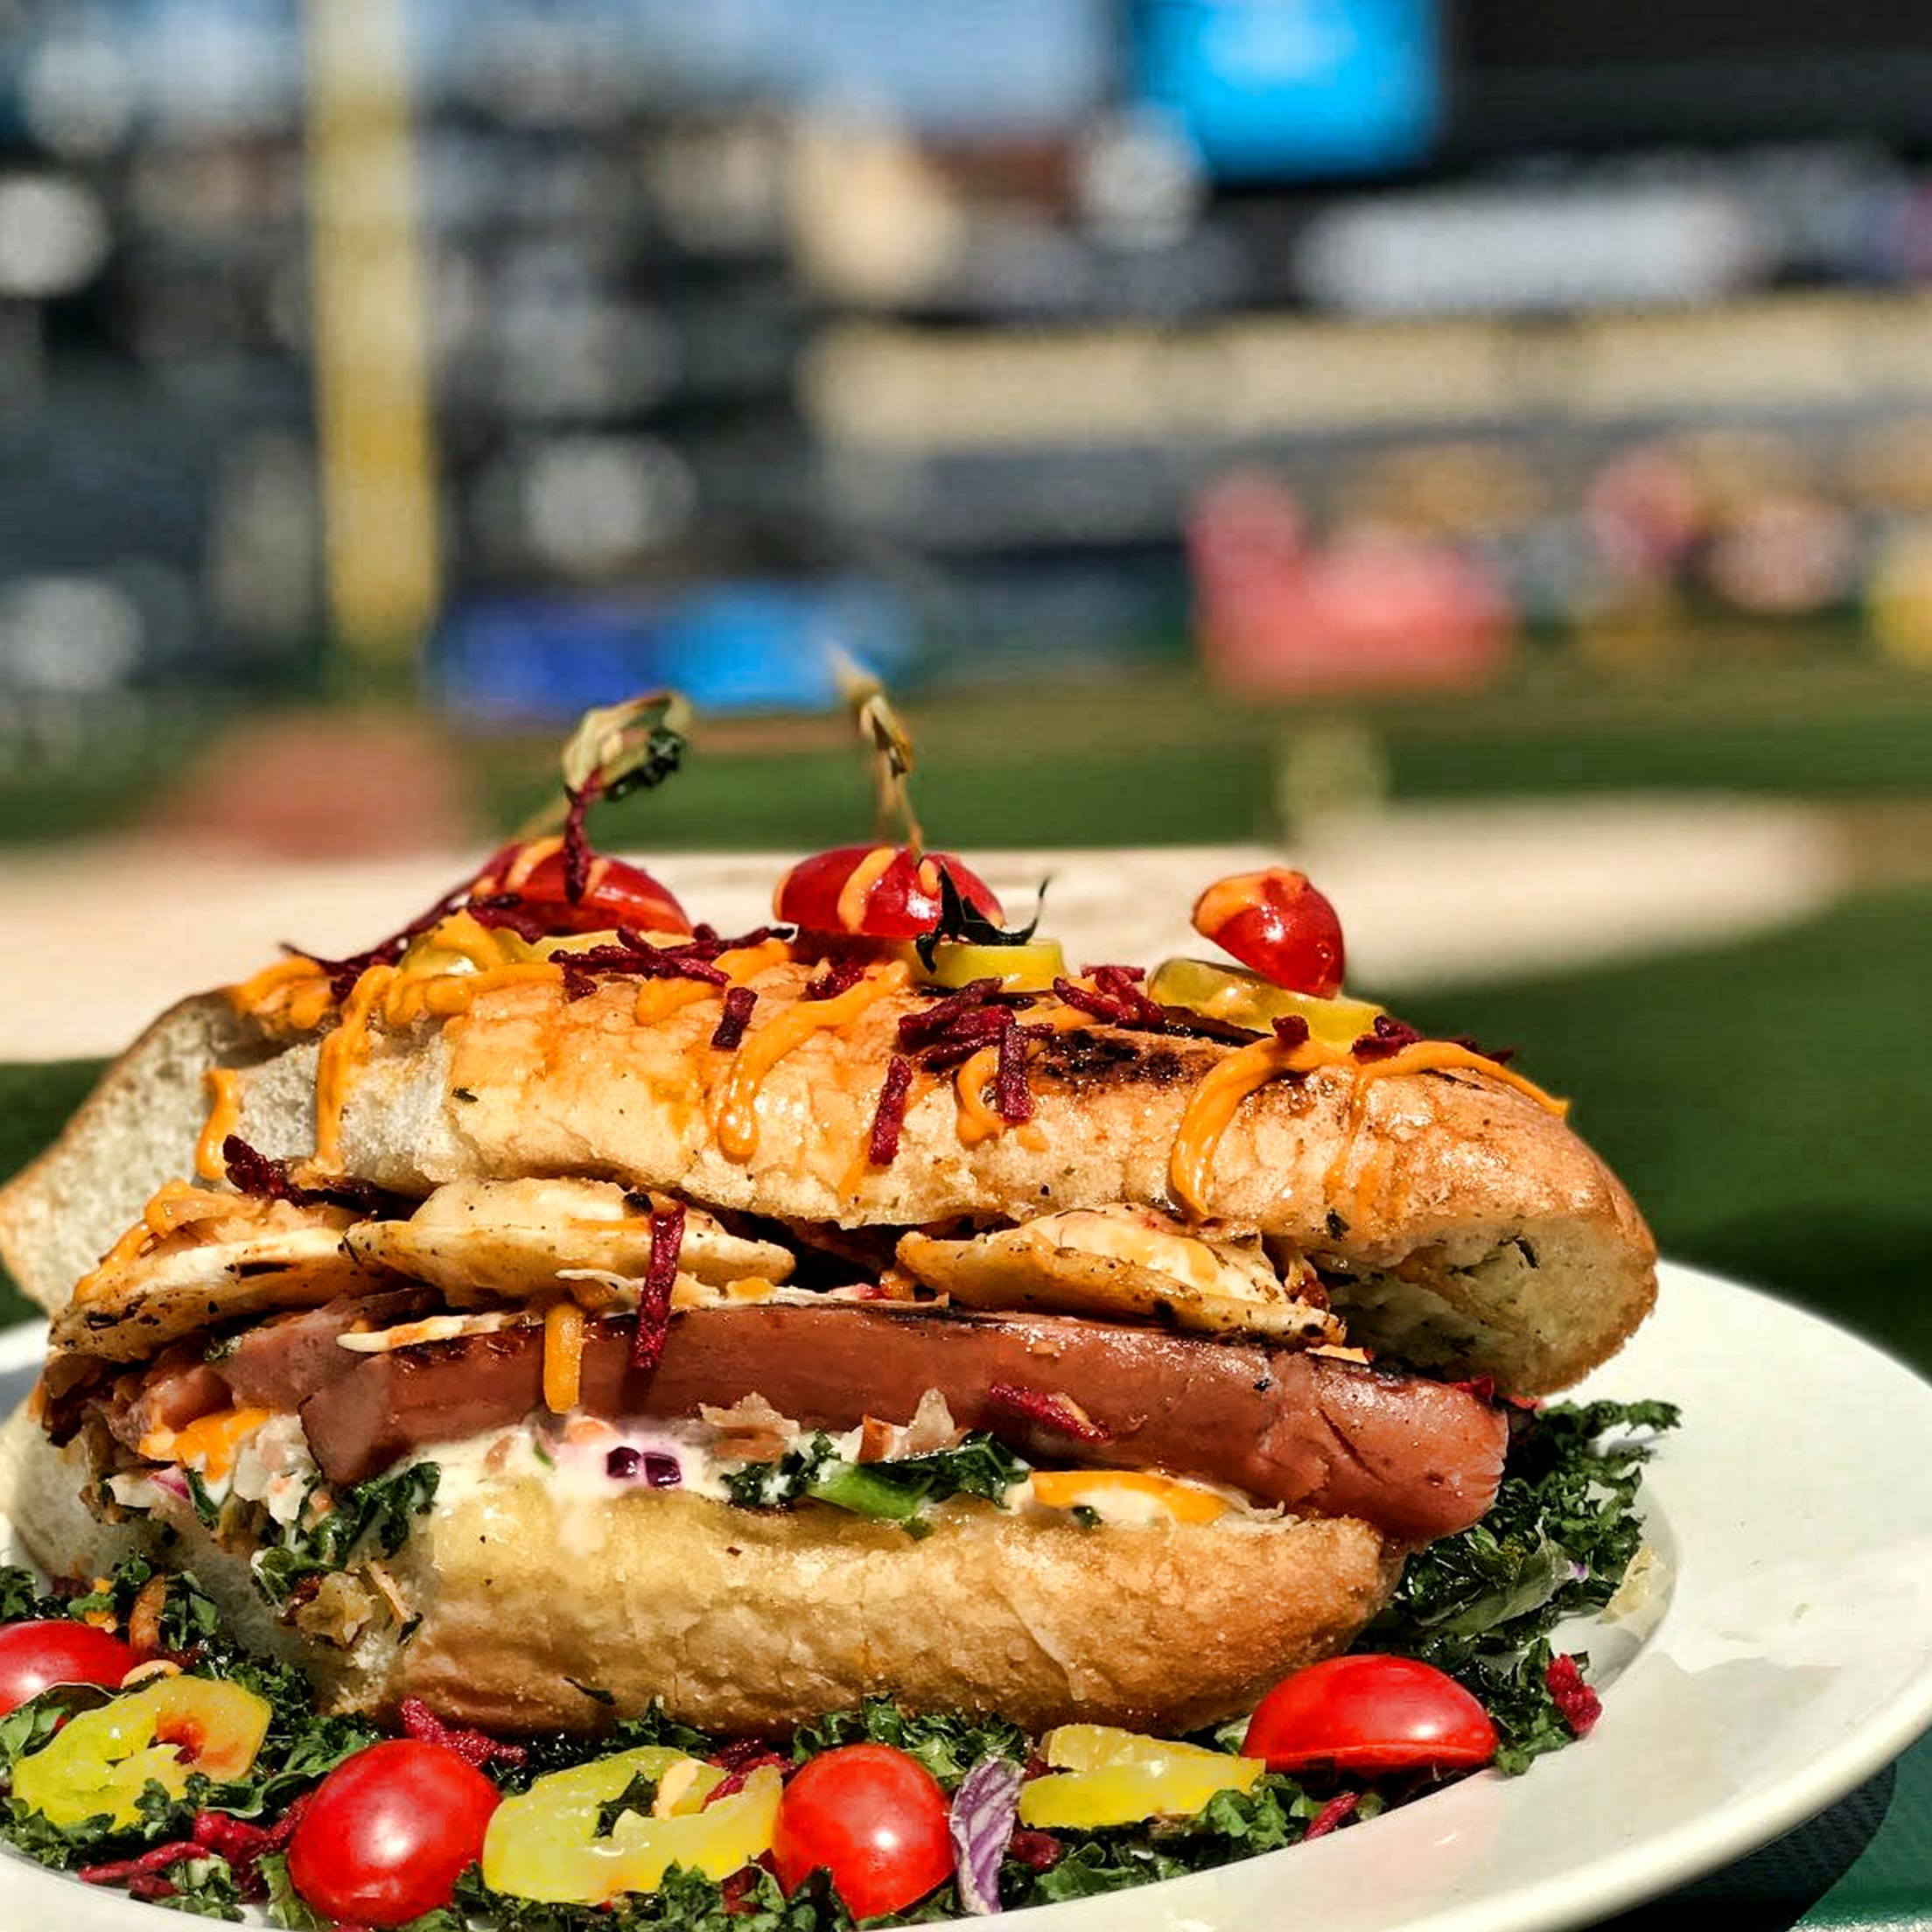 Few balk at PNC Park prices — even $13 for a hot dog and fries